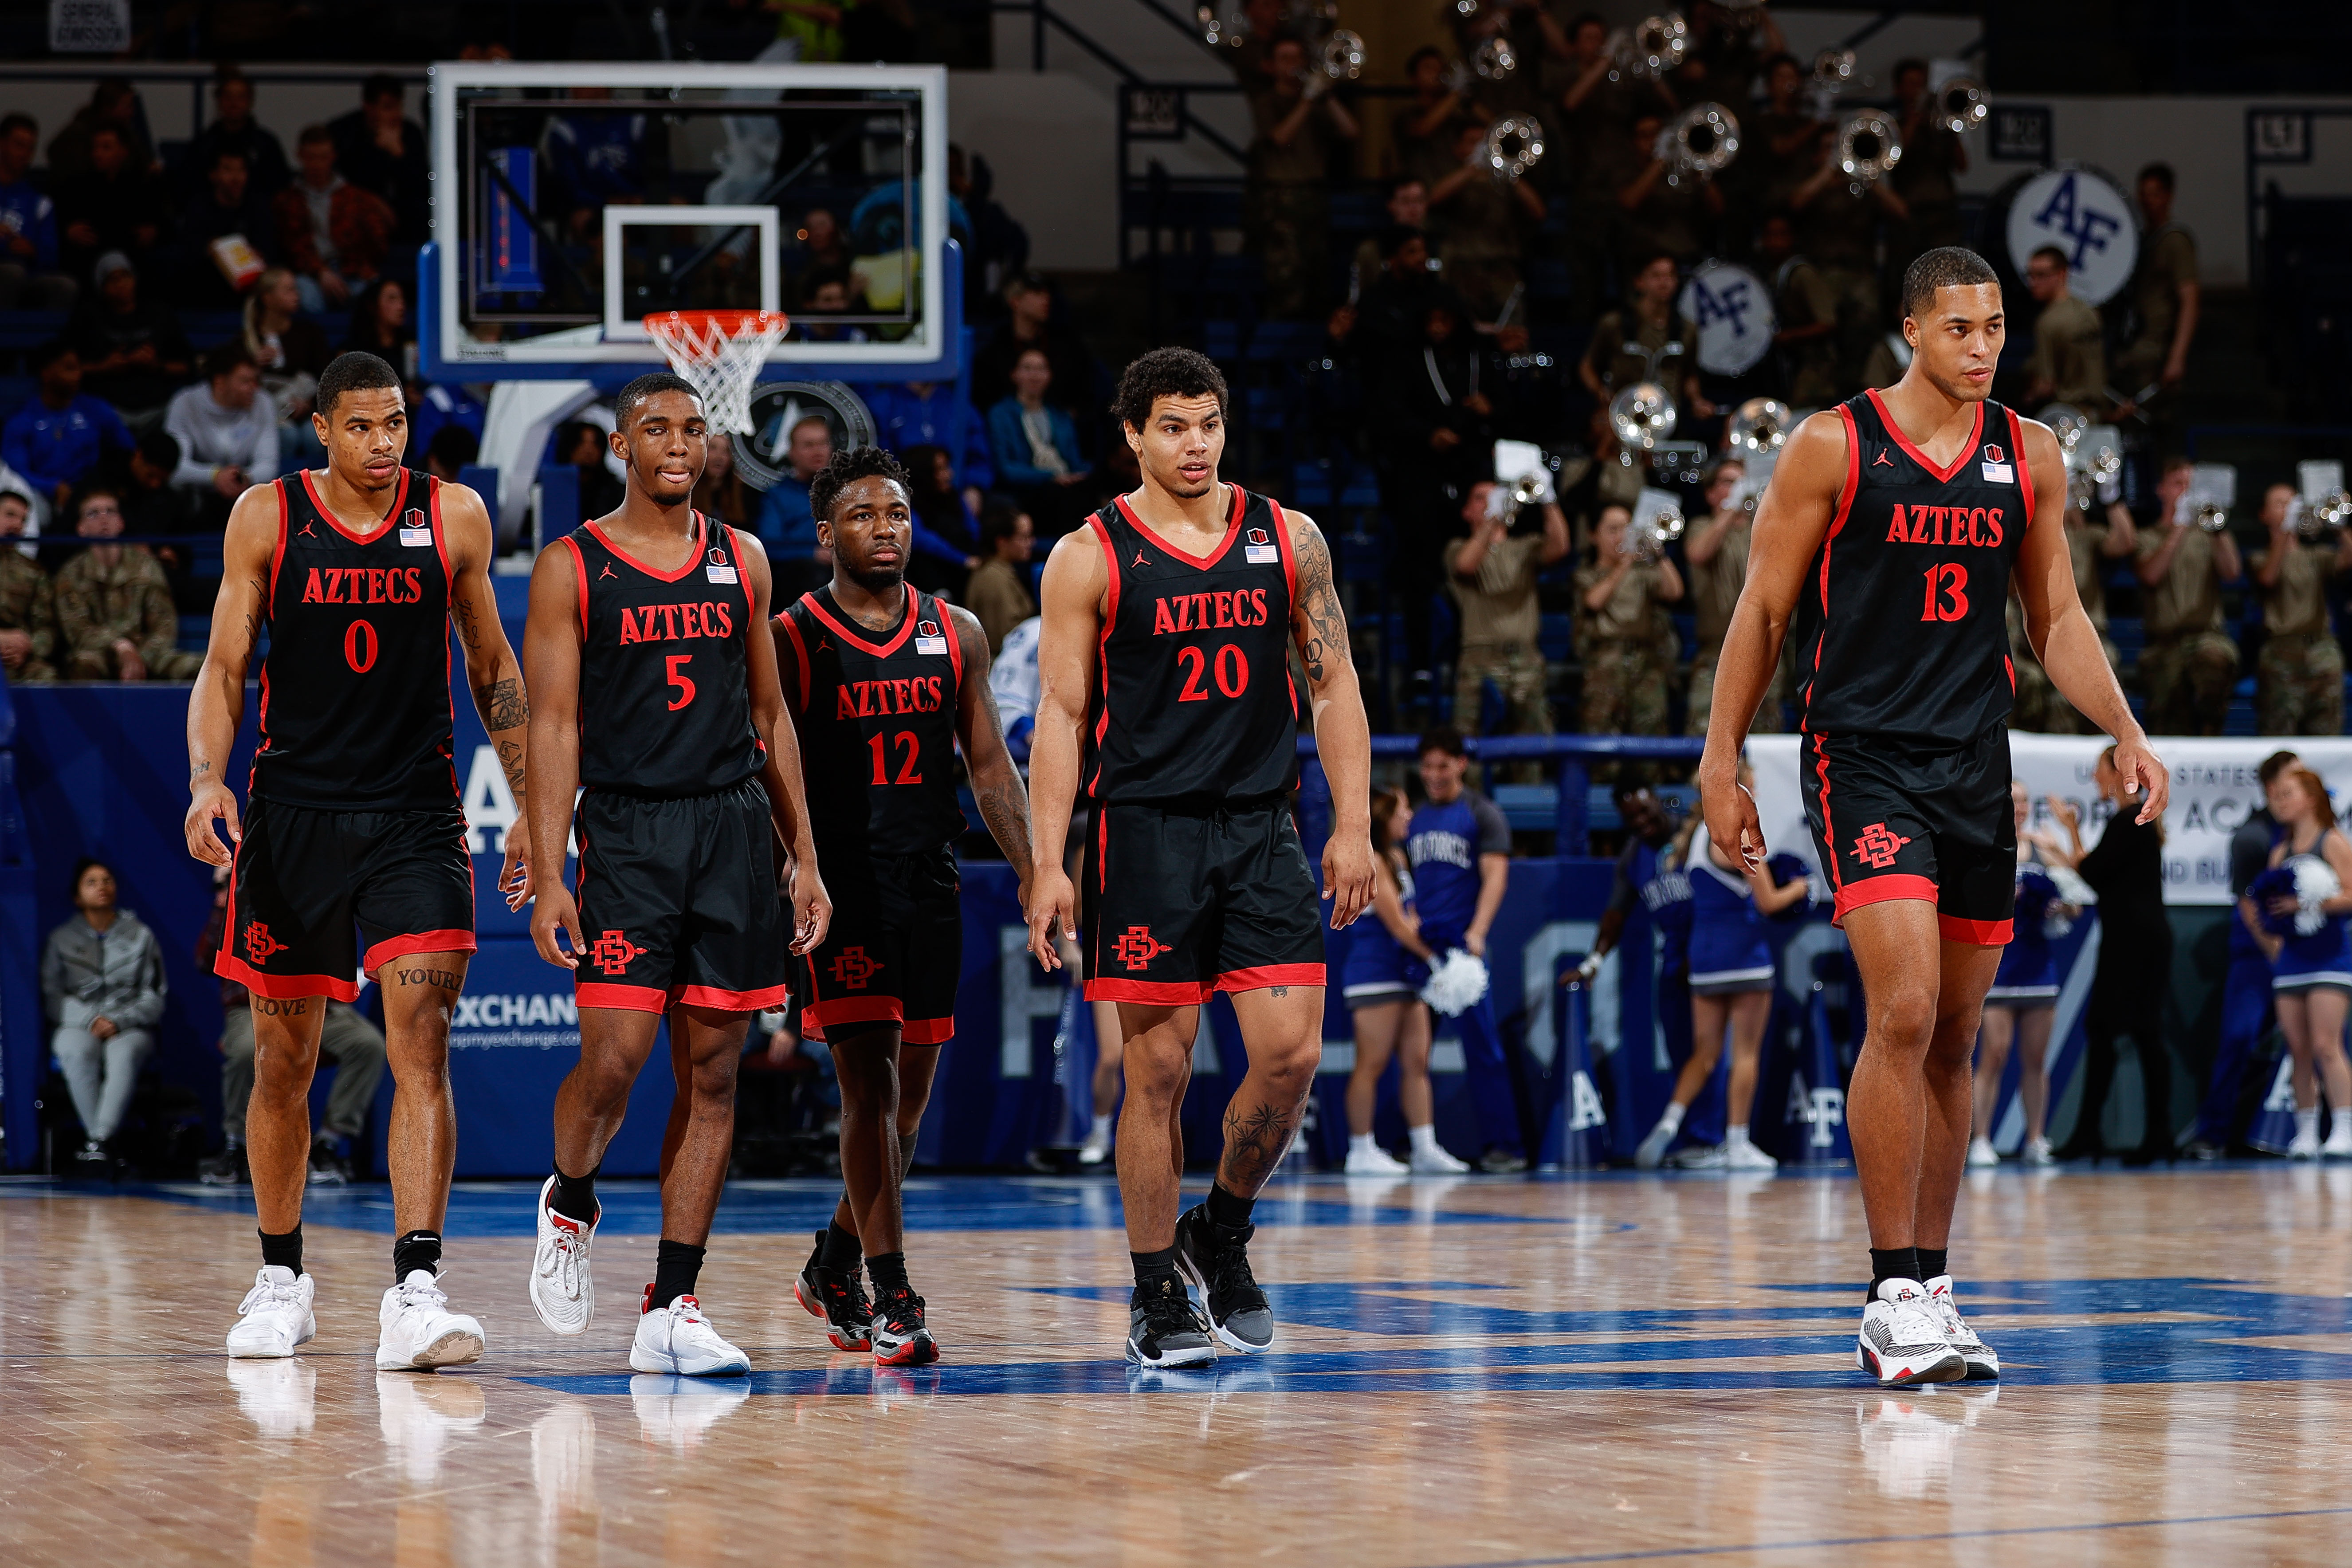 NCAA Basketball: San Diego State at Air Force